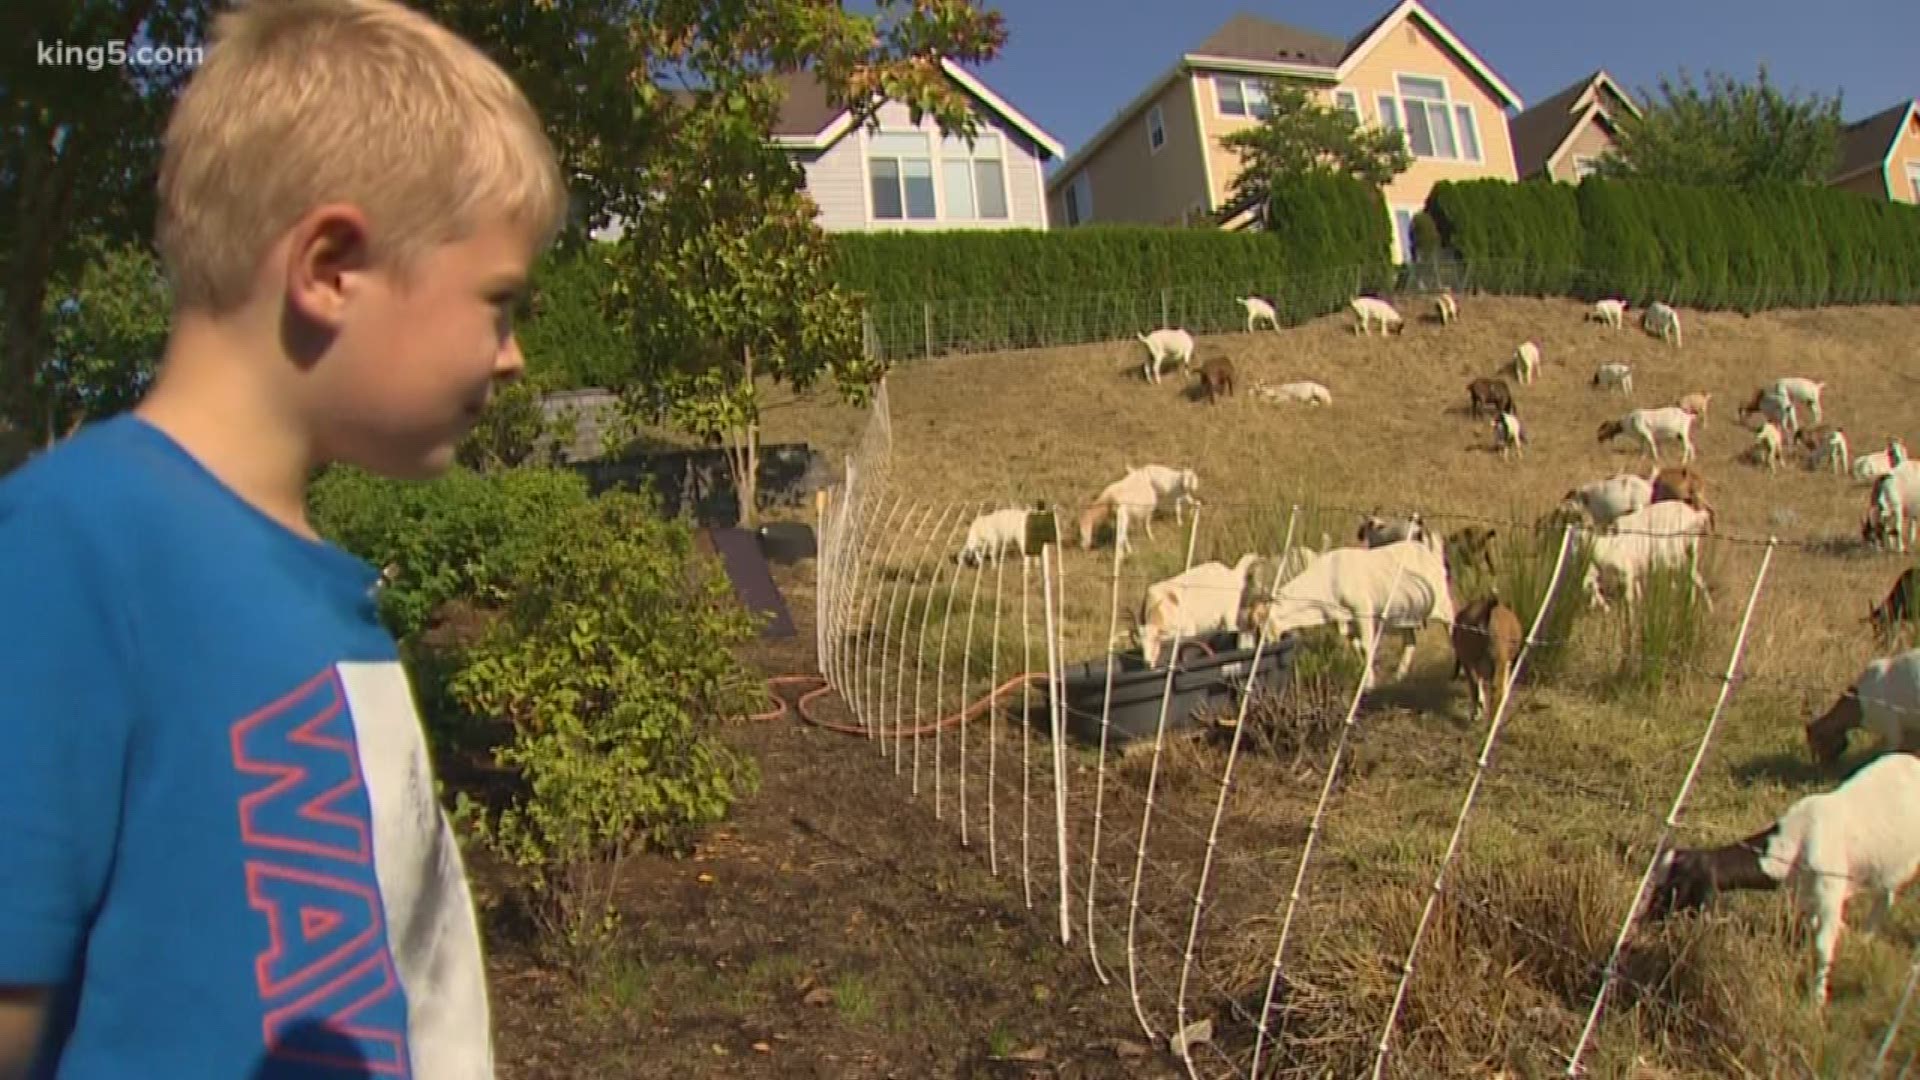 Hundreds of grazing goats escaped their enclosure and ate their way through an Issaquah neighborhood.  Neighbors smiled through the whole situation and helped safely get the goats back into their enclosure.